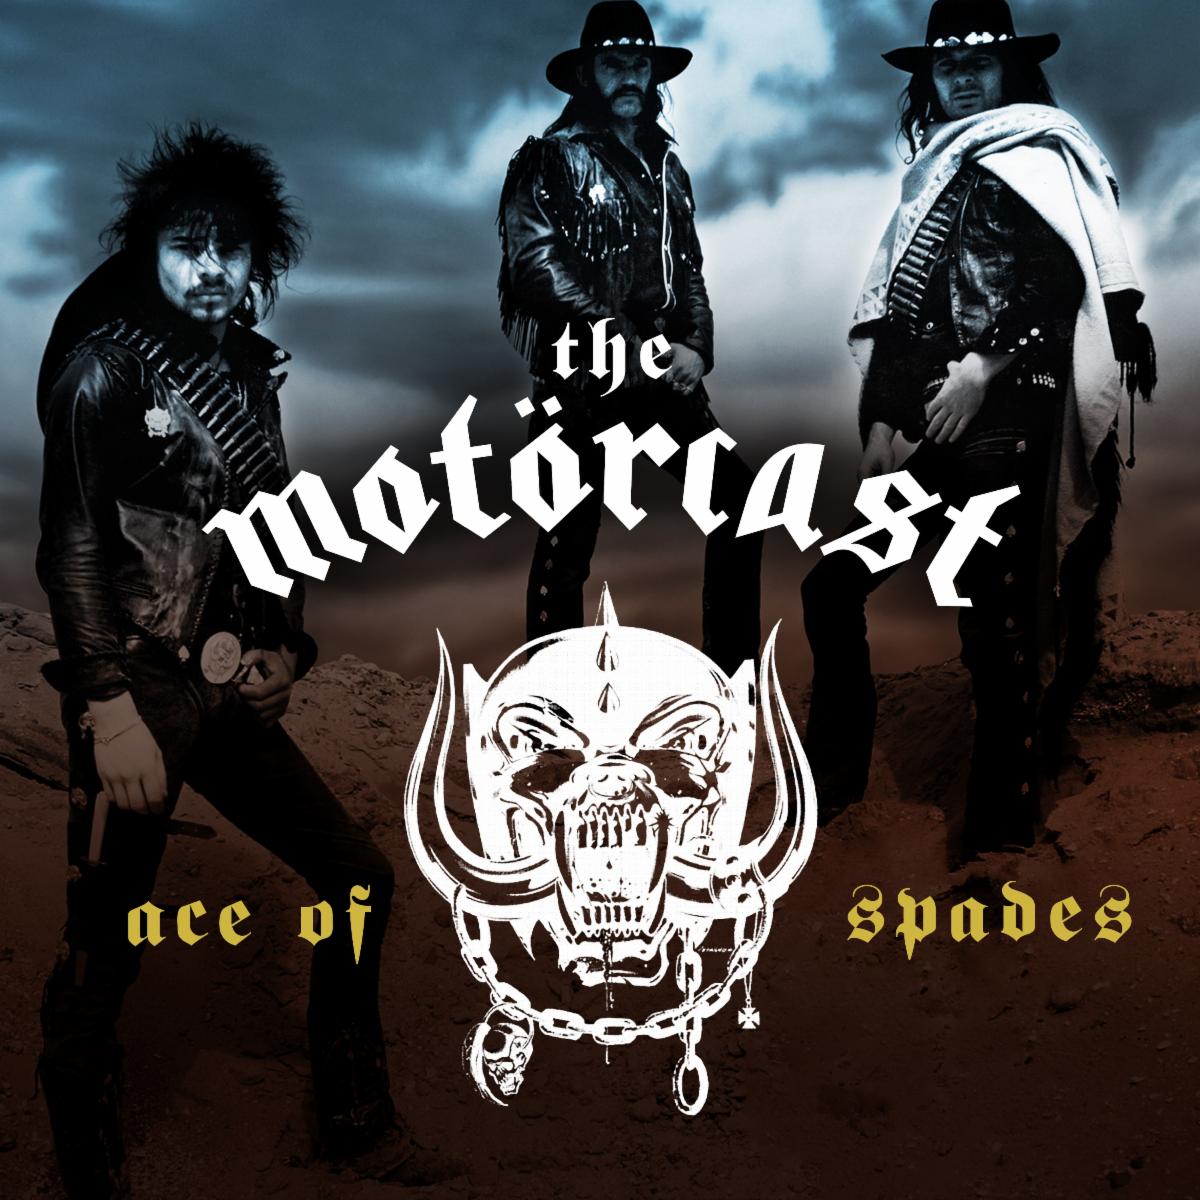 MOTÖRHEAD Announces Podcast Mini Series as They Continue 40th Anniversary Celebrations of "Ace Of Spades"